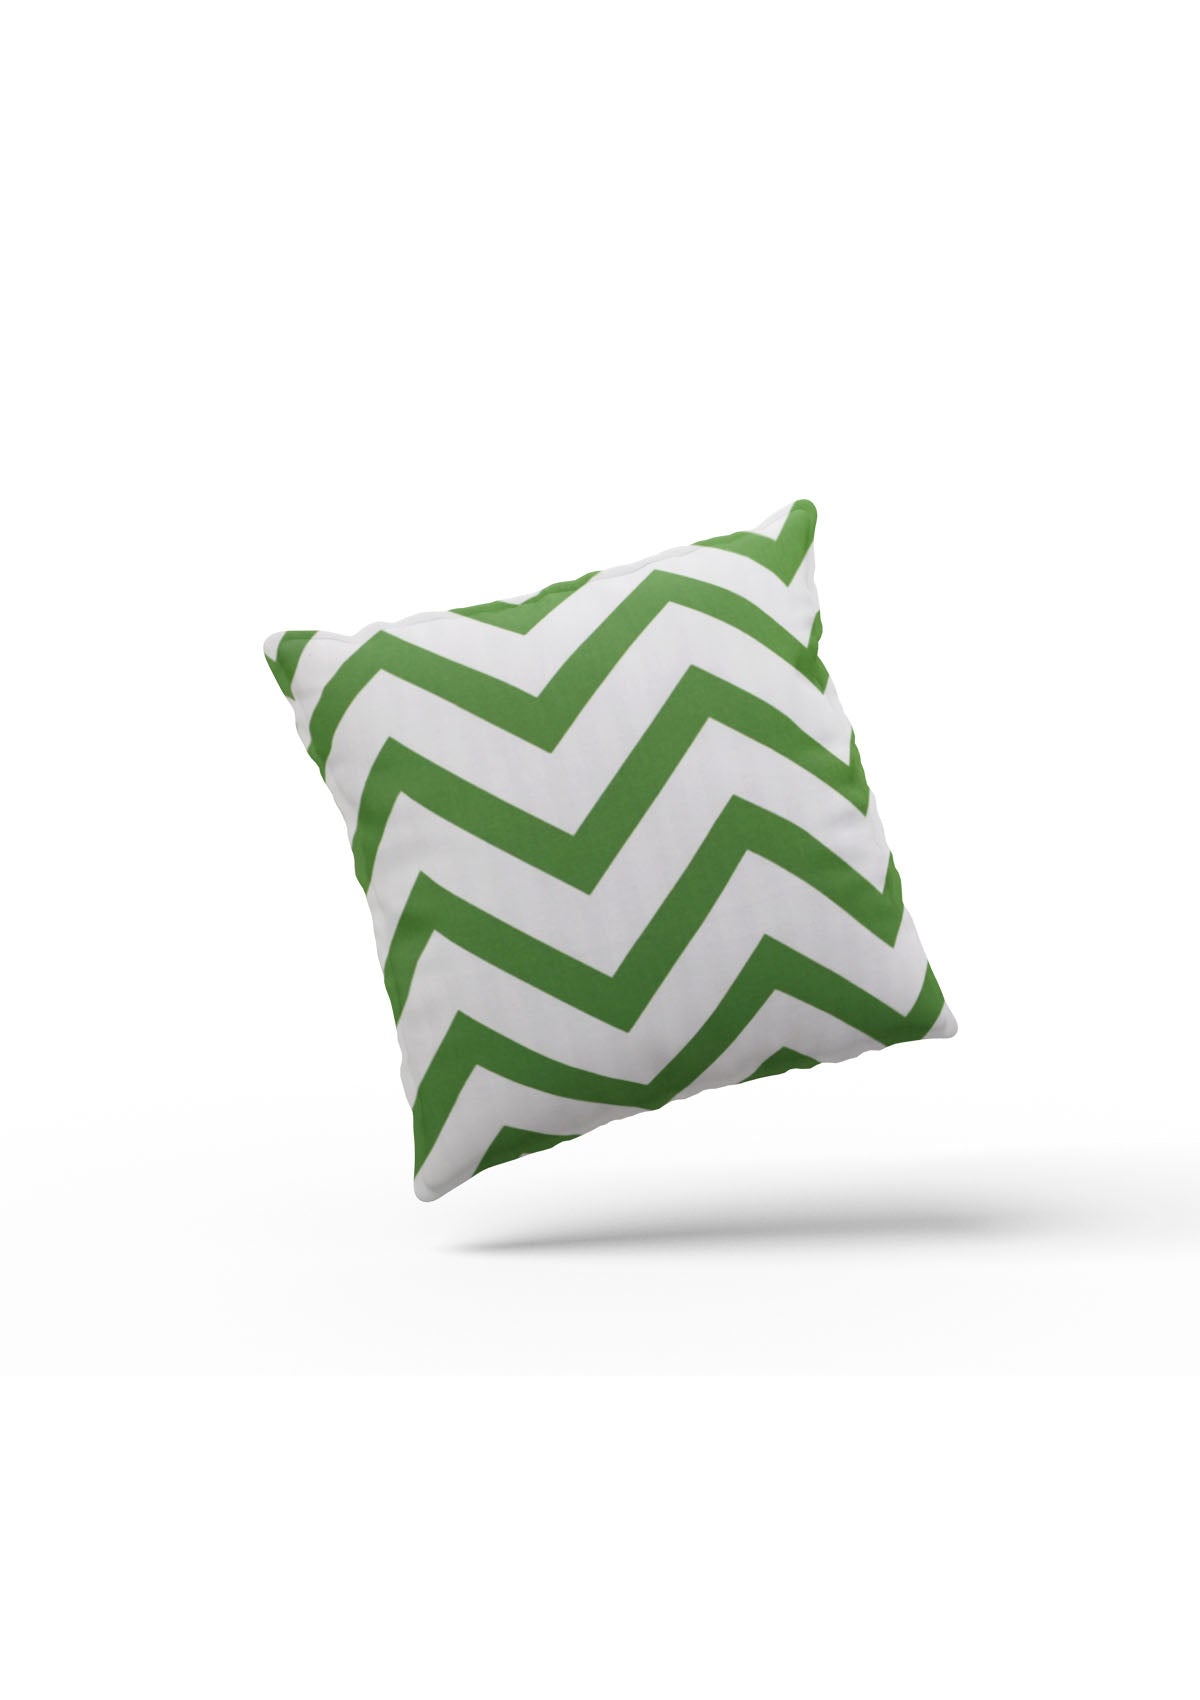  Refreshing green stripe cushion cover for nature-inspired decor